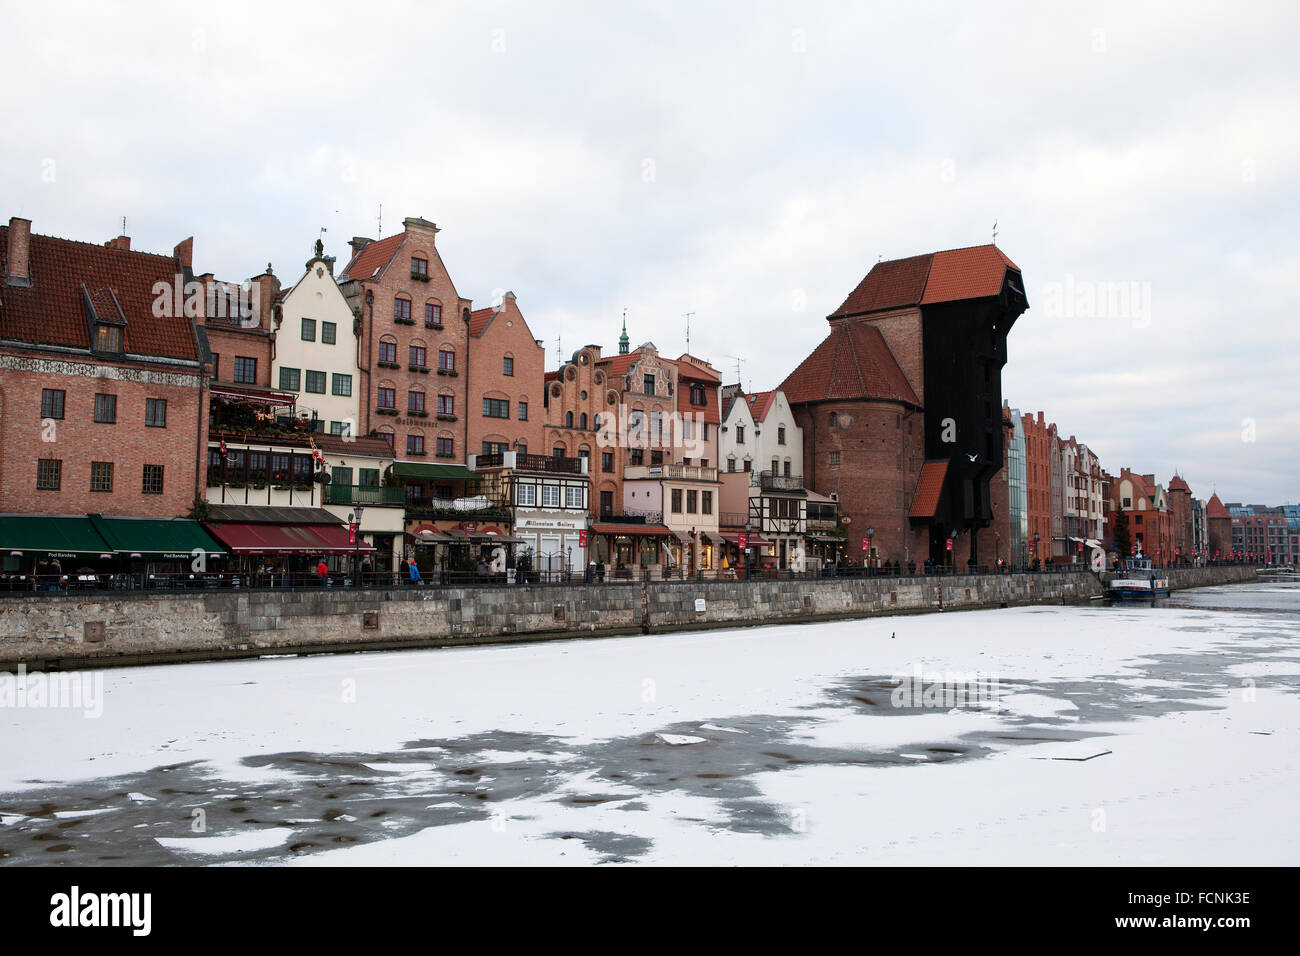 Gdansk, Old Town in Winter Stock Photo